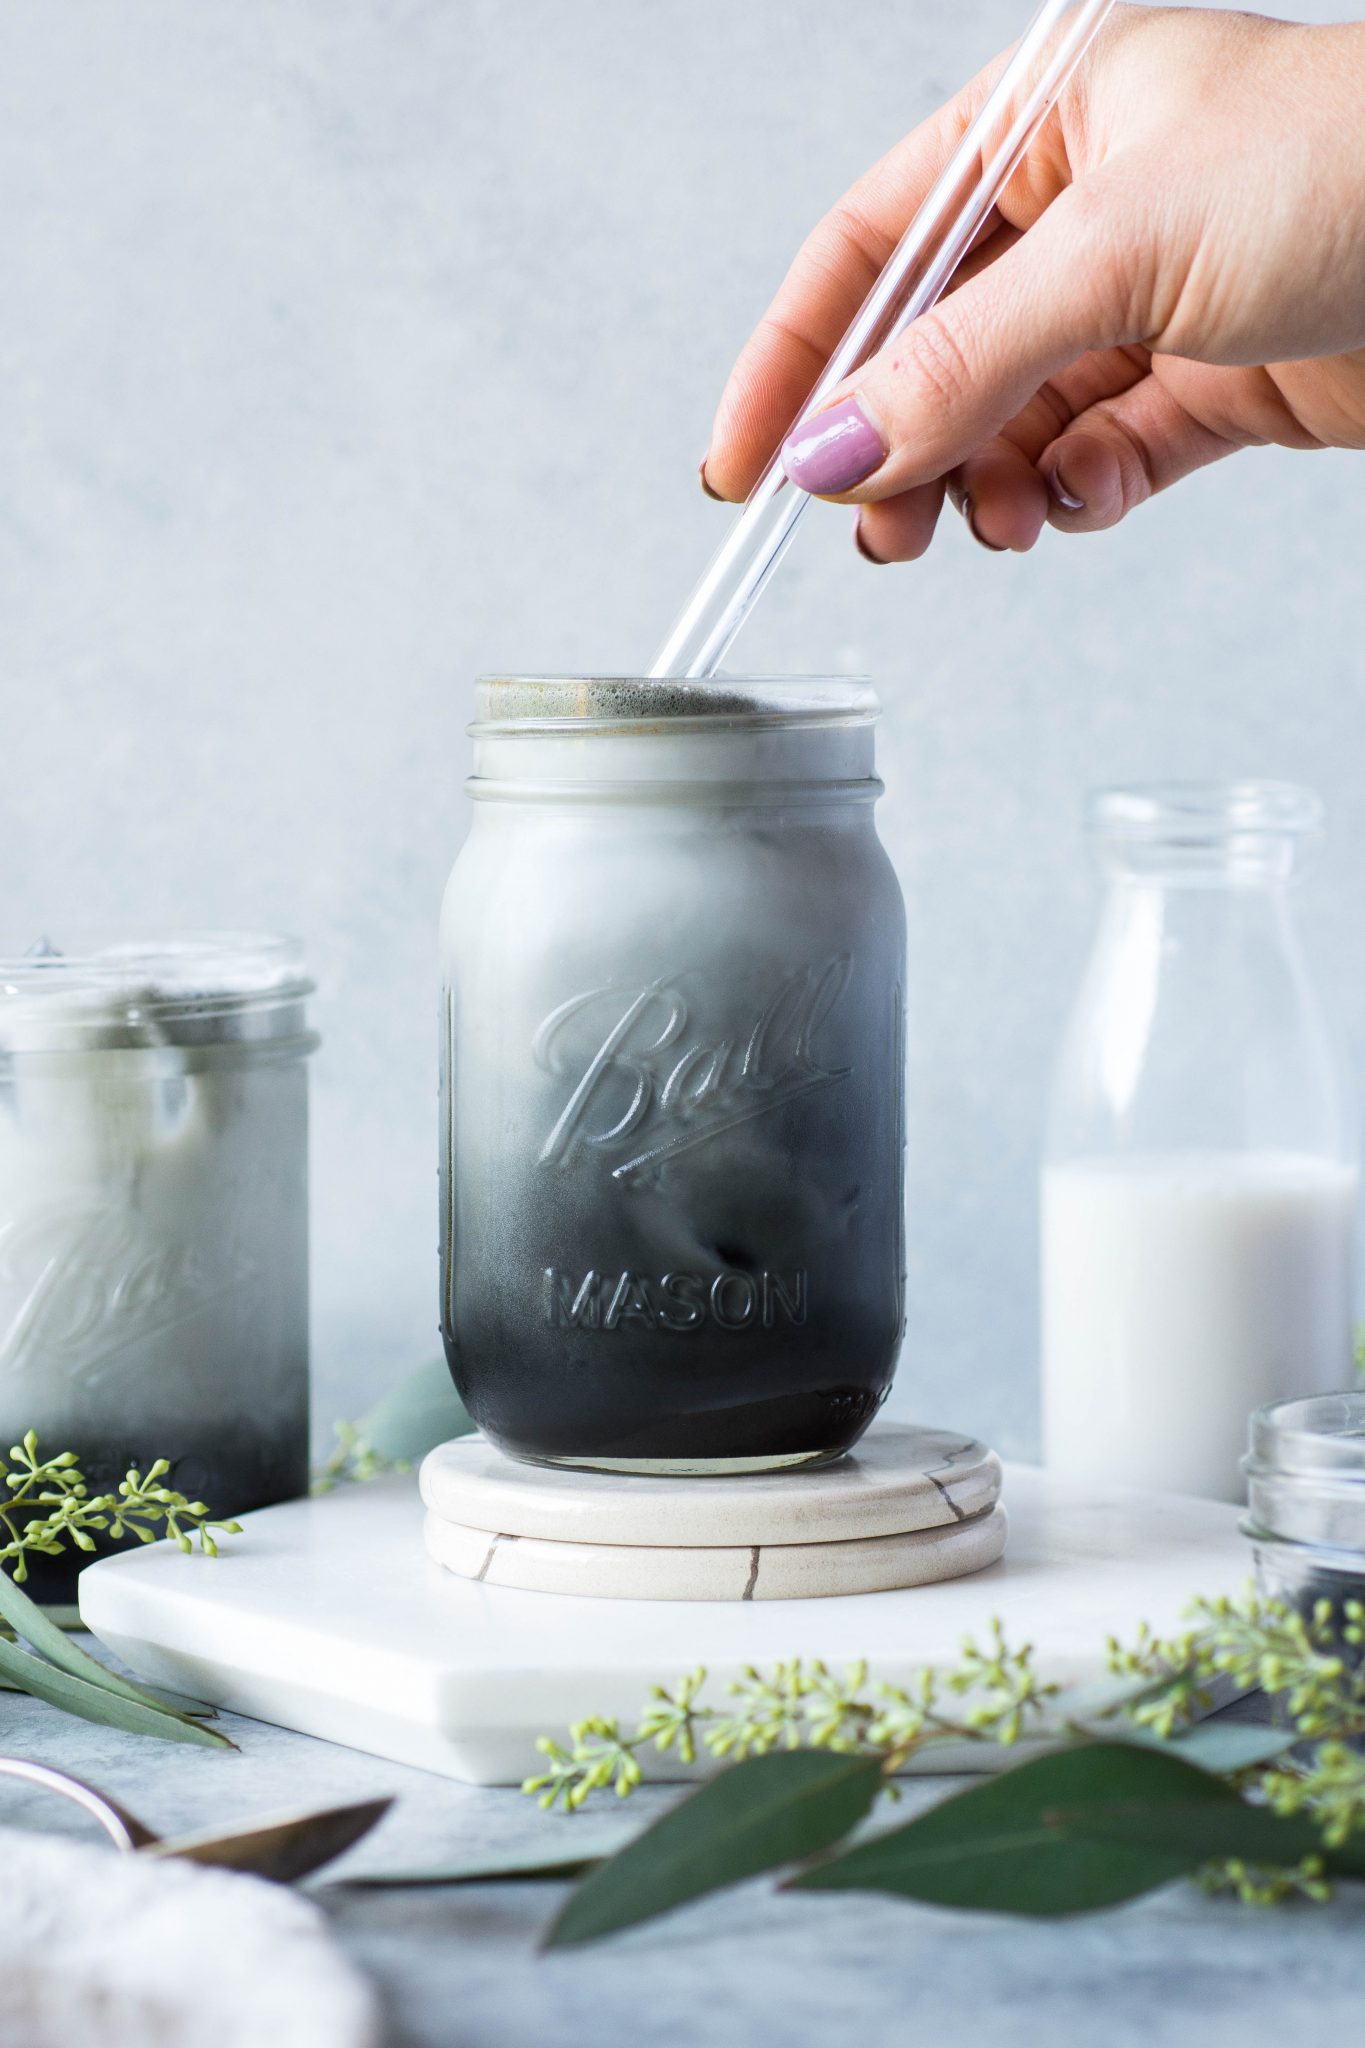 Black and grey toned iced charcoal and almond milk latte in a mason jar, on a grey / blue background with a hand putting a glass straw into the cup.